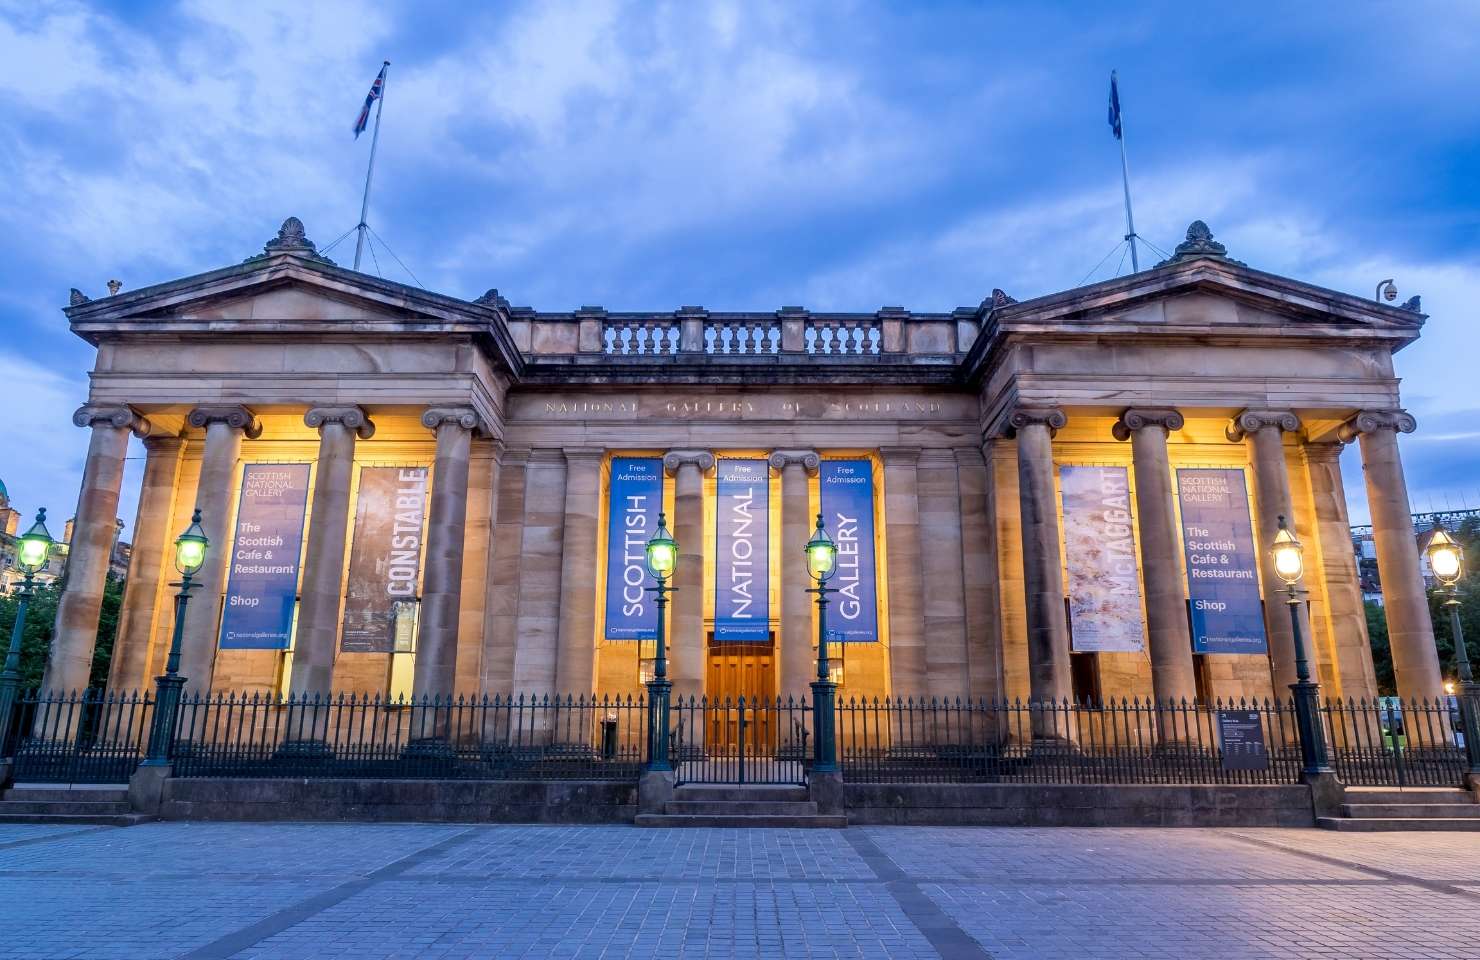 Scottish National Gallery Building